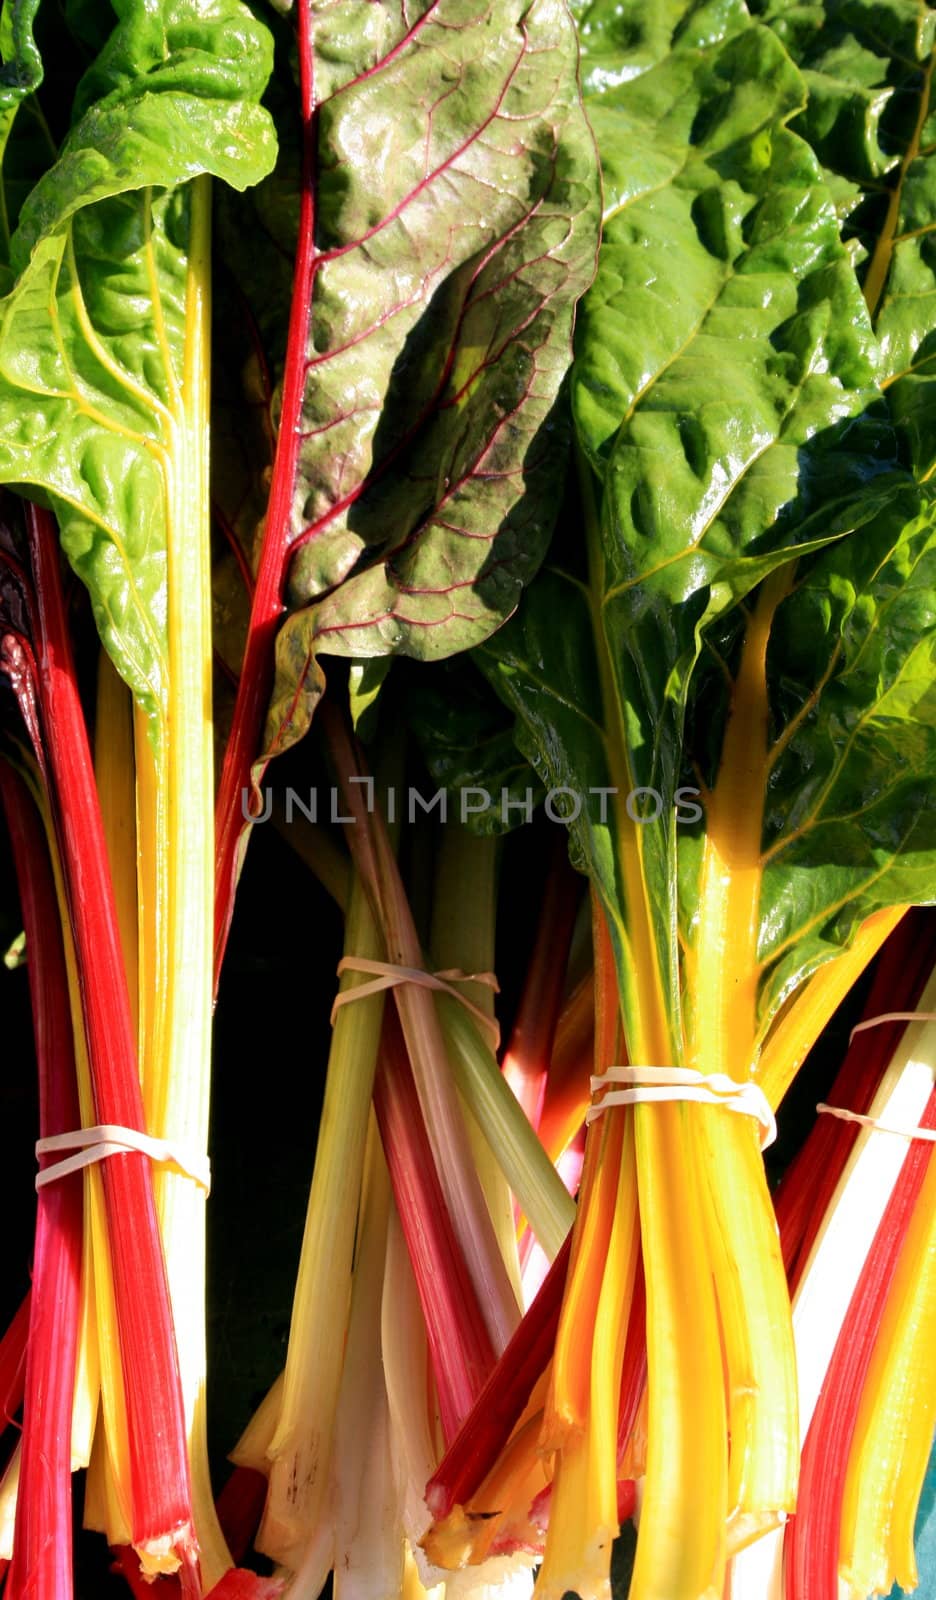 freshly harvested rainbow swiss chard, at the farmers market